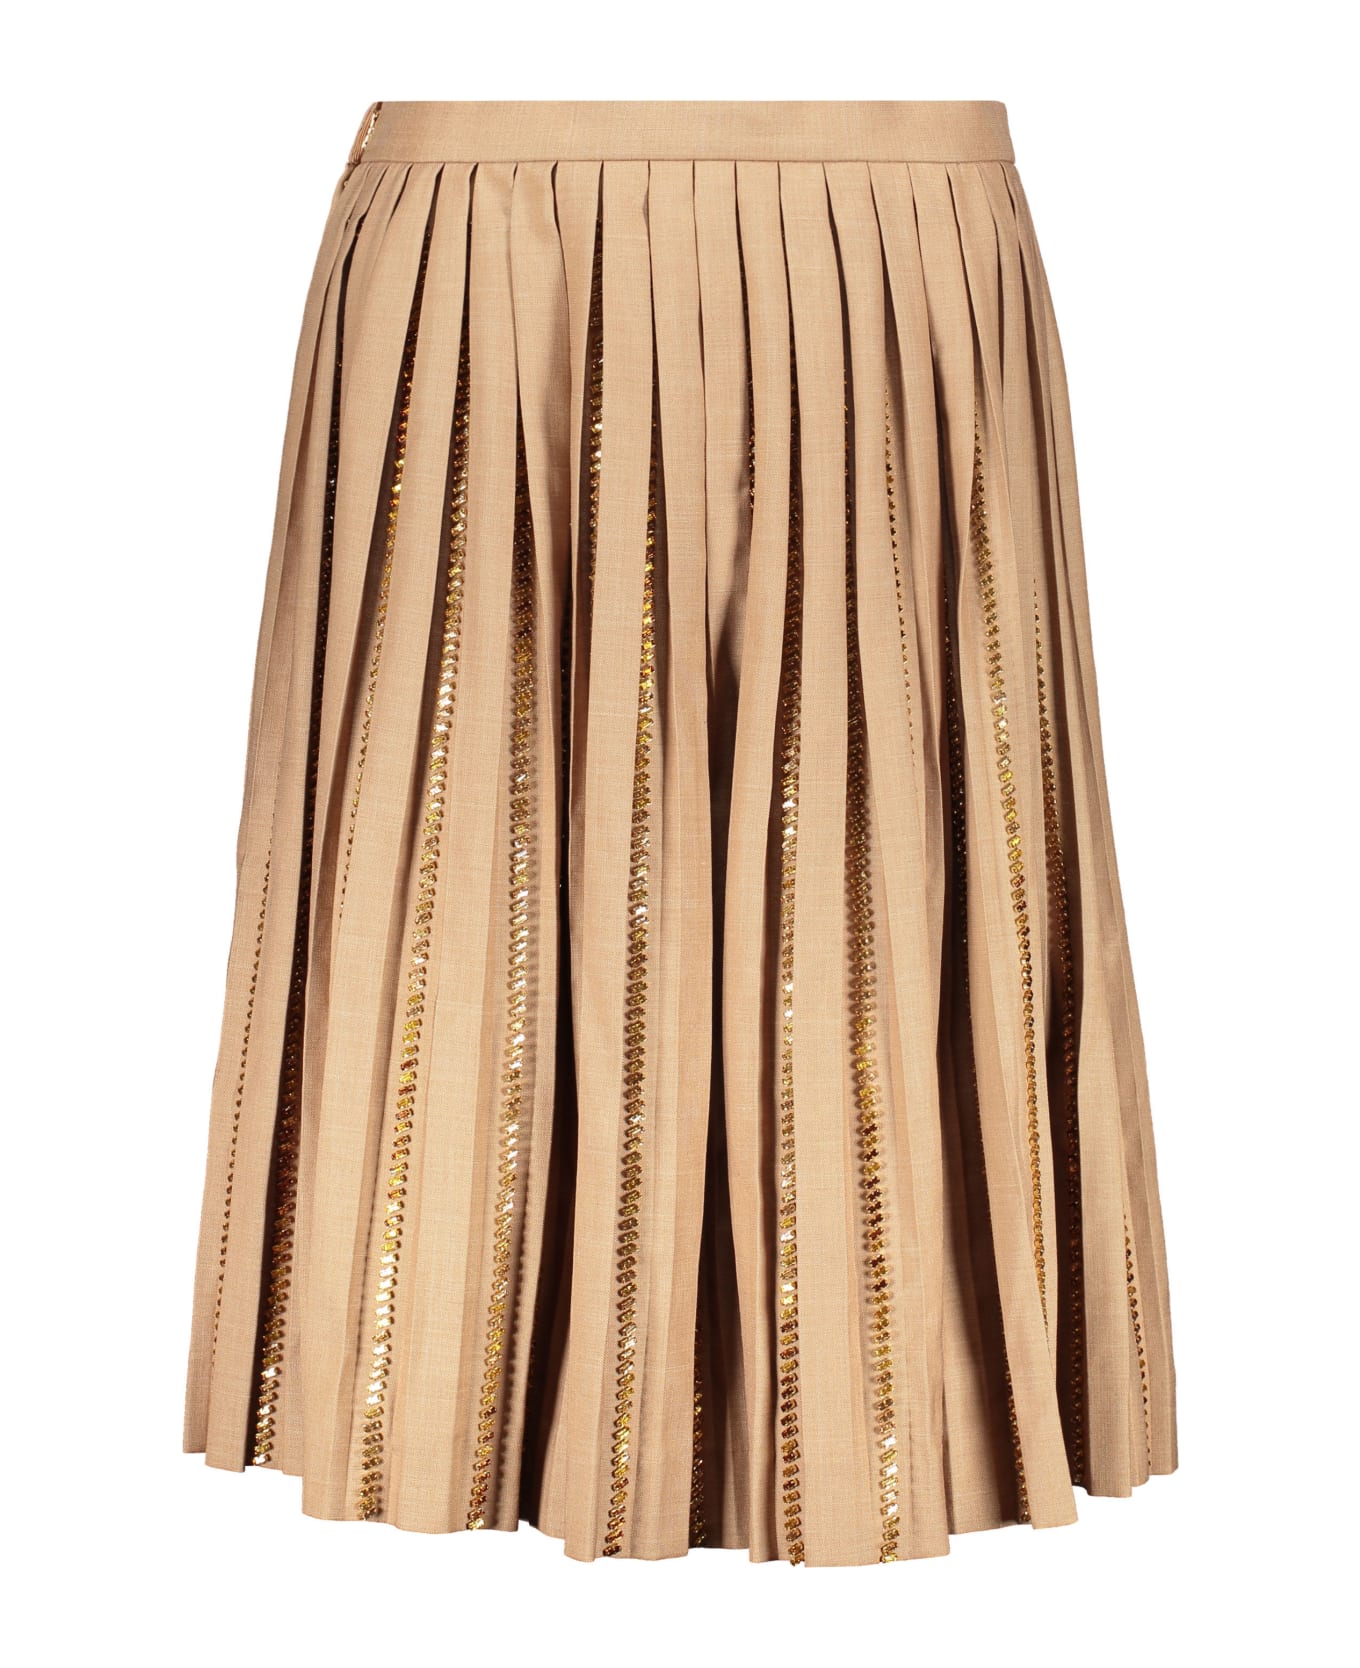 Burberry Pleated Skirt - brown スカート